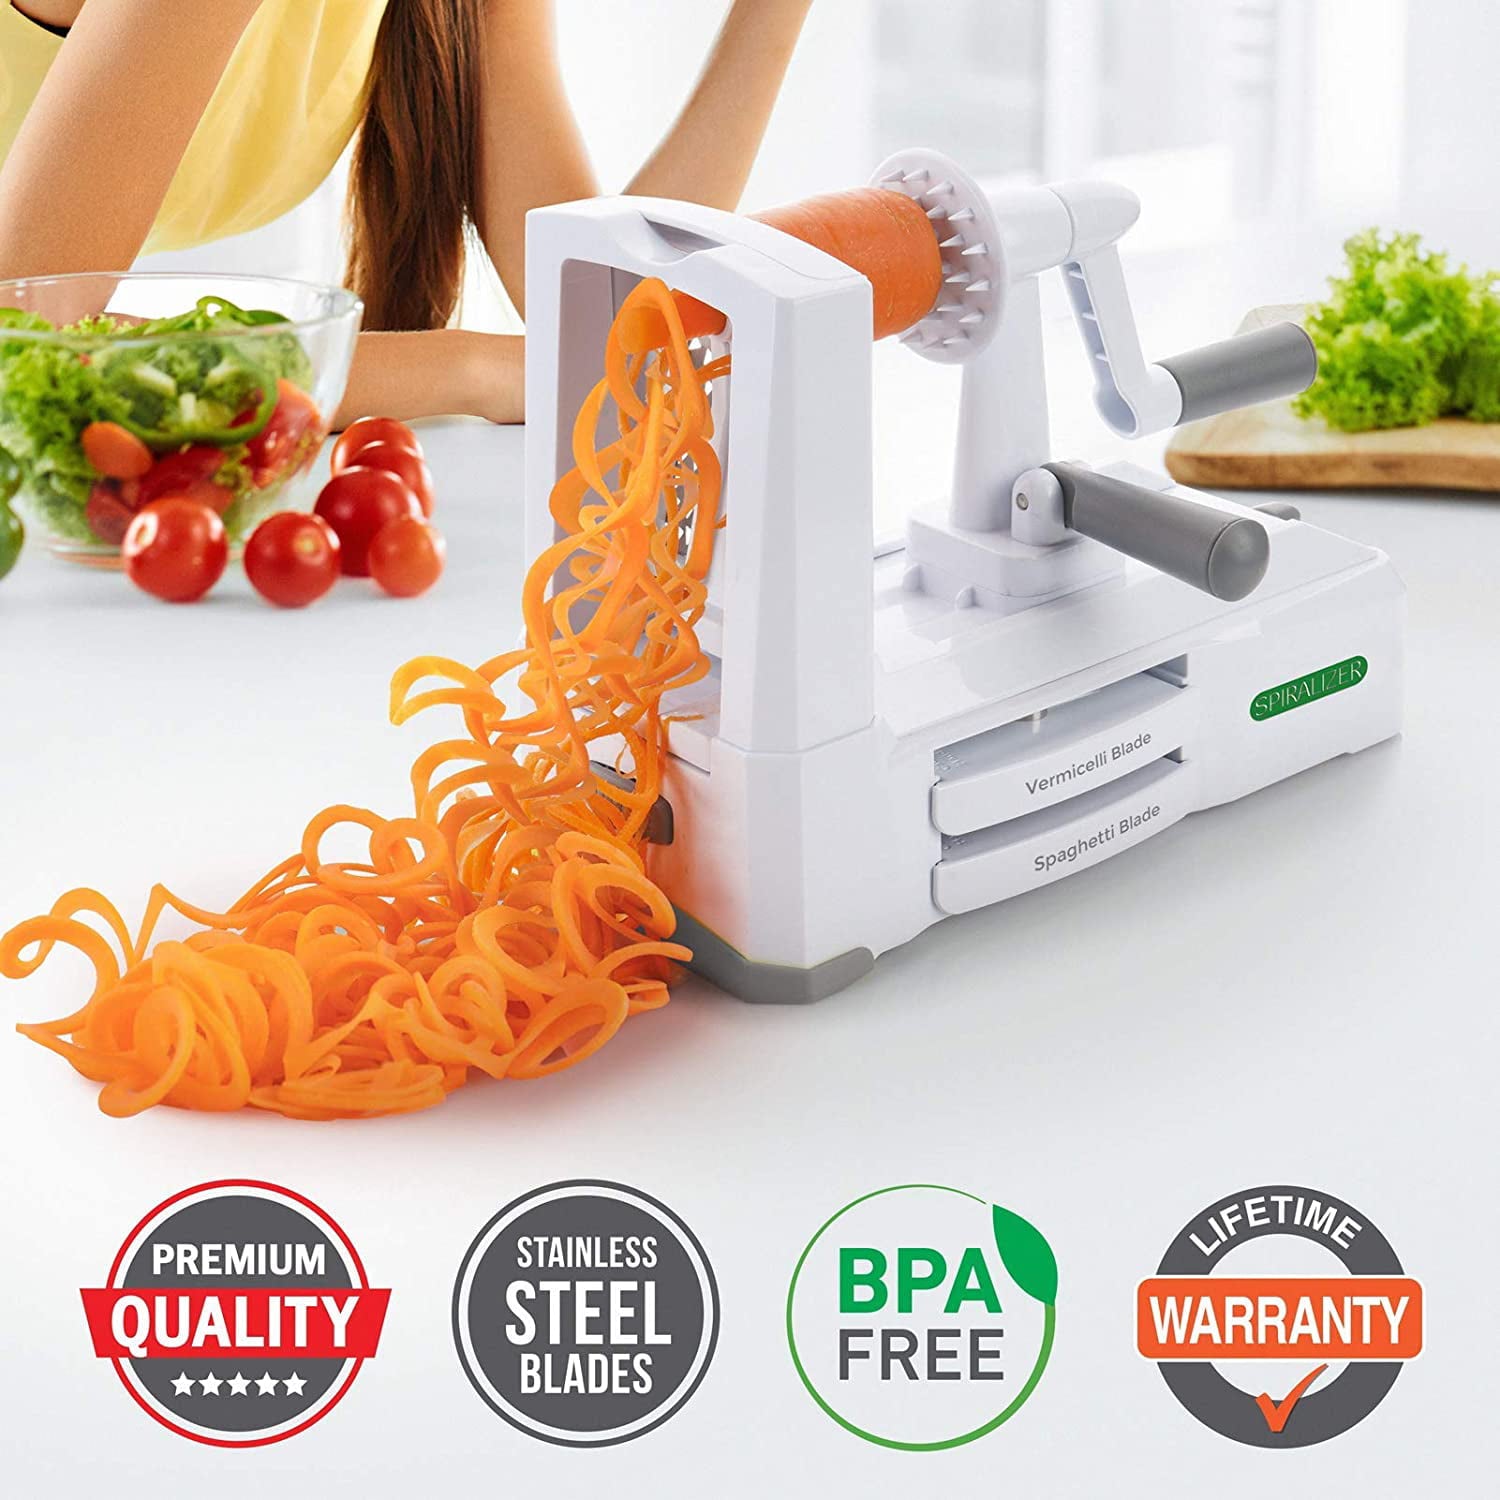 Spiralizer Ultimate 10 Strongest-and-Heaviest Duty Vegetable Slicer Best Veggie Pasta Spaghetti Maker for Keto/Paleo/Gluten-Free, With Extra Blade Caddy & 4 Recipe Ebook Color White